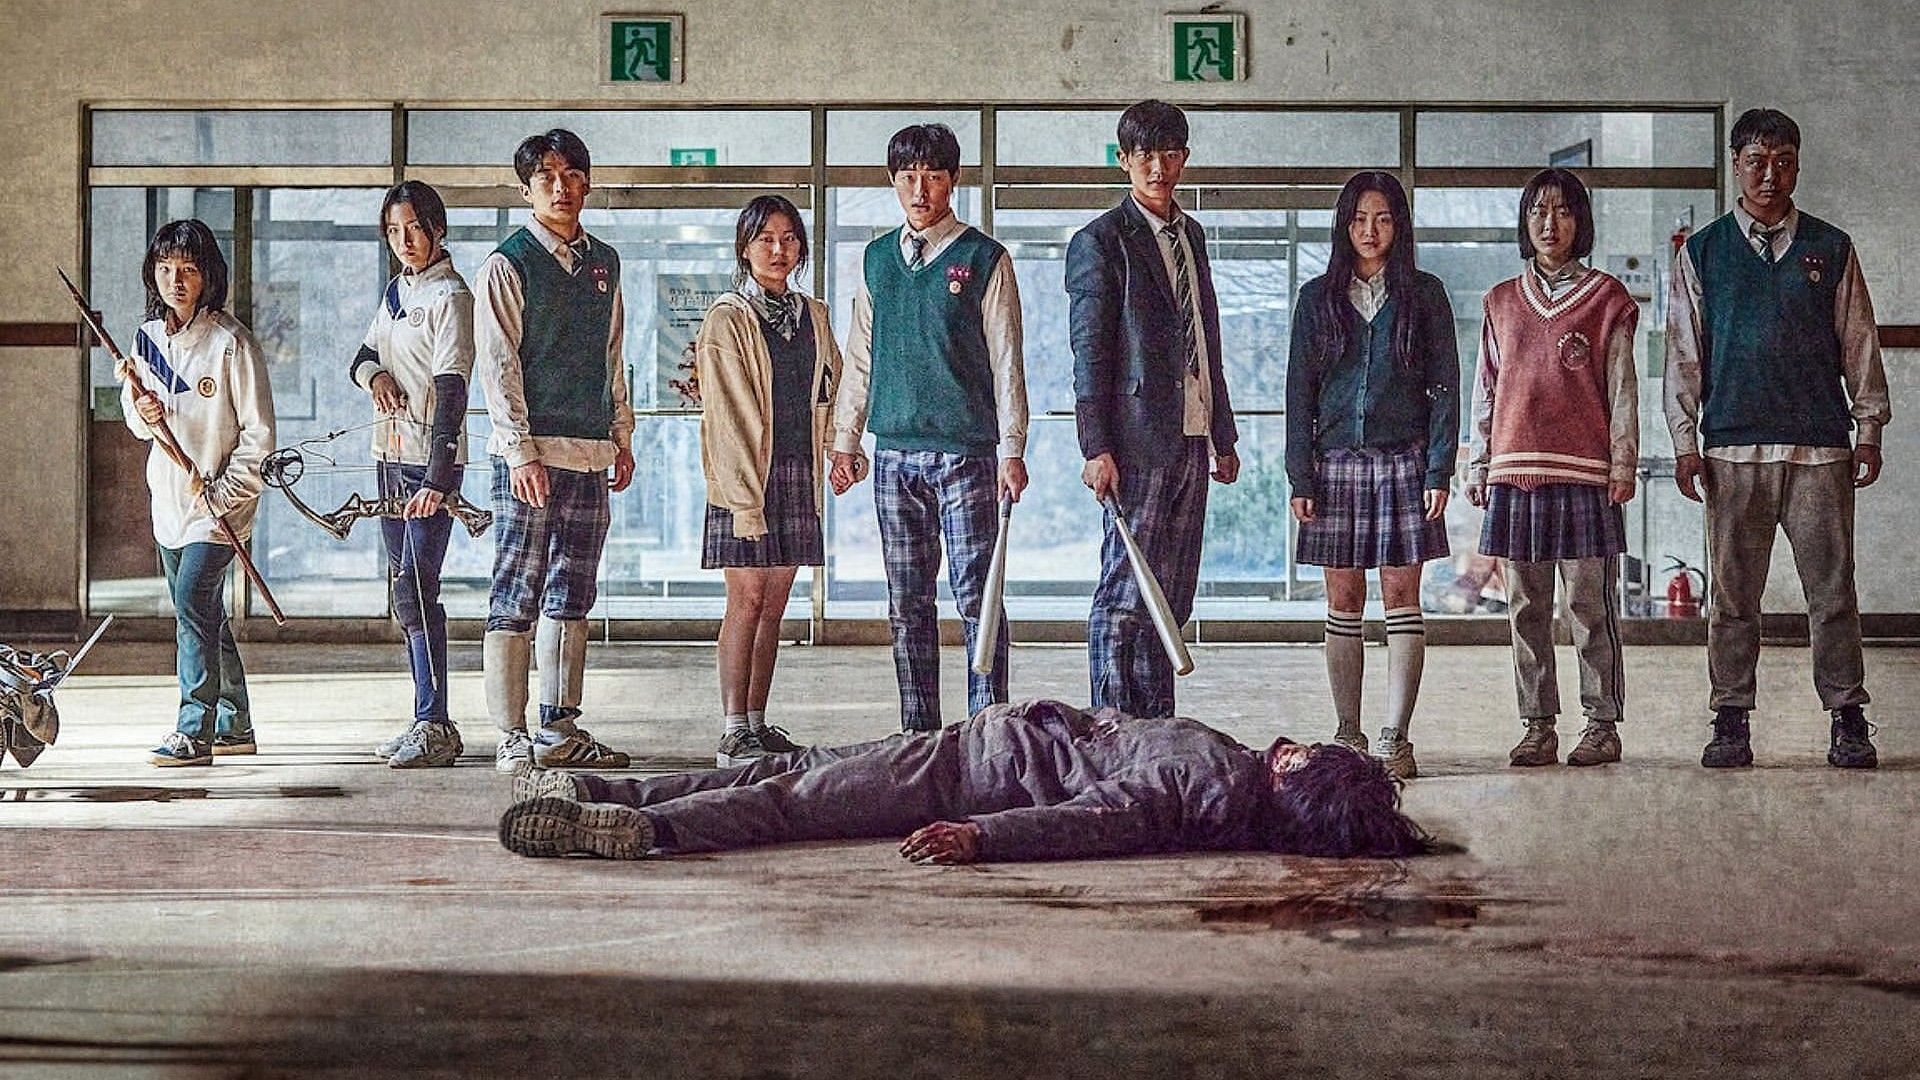 Yoon Chan-young and Park Solomon on whether their love stories would have happened in the absence of zombies (Image via Netflix @Google)